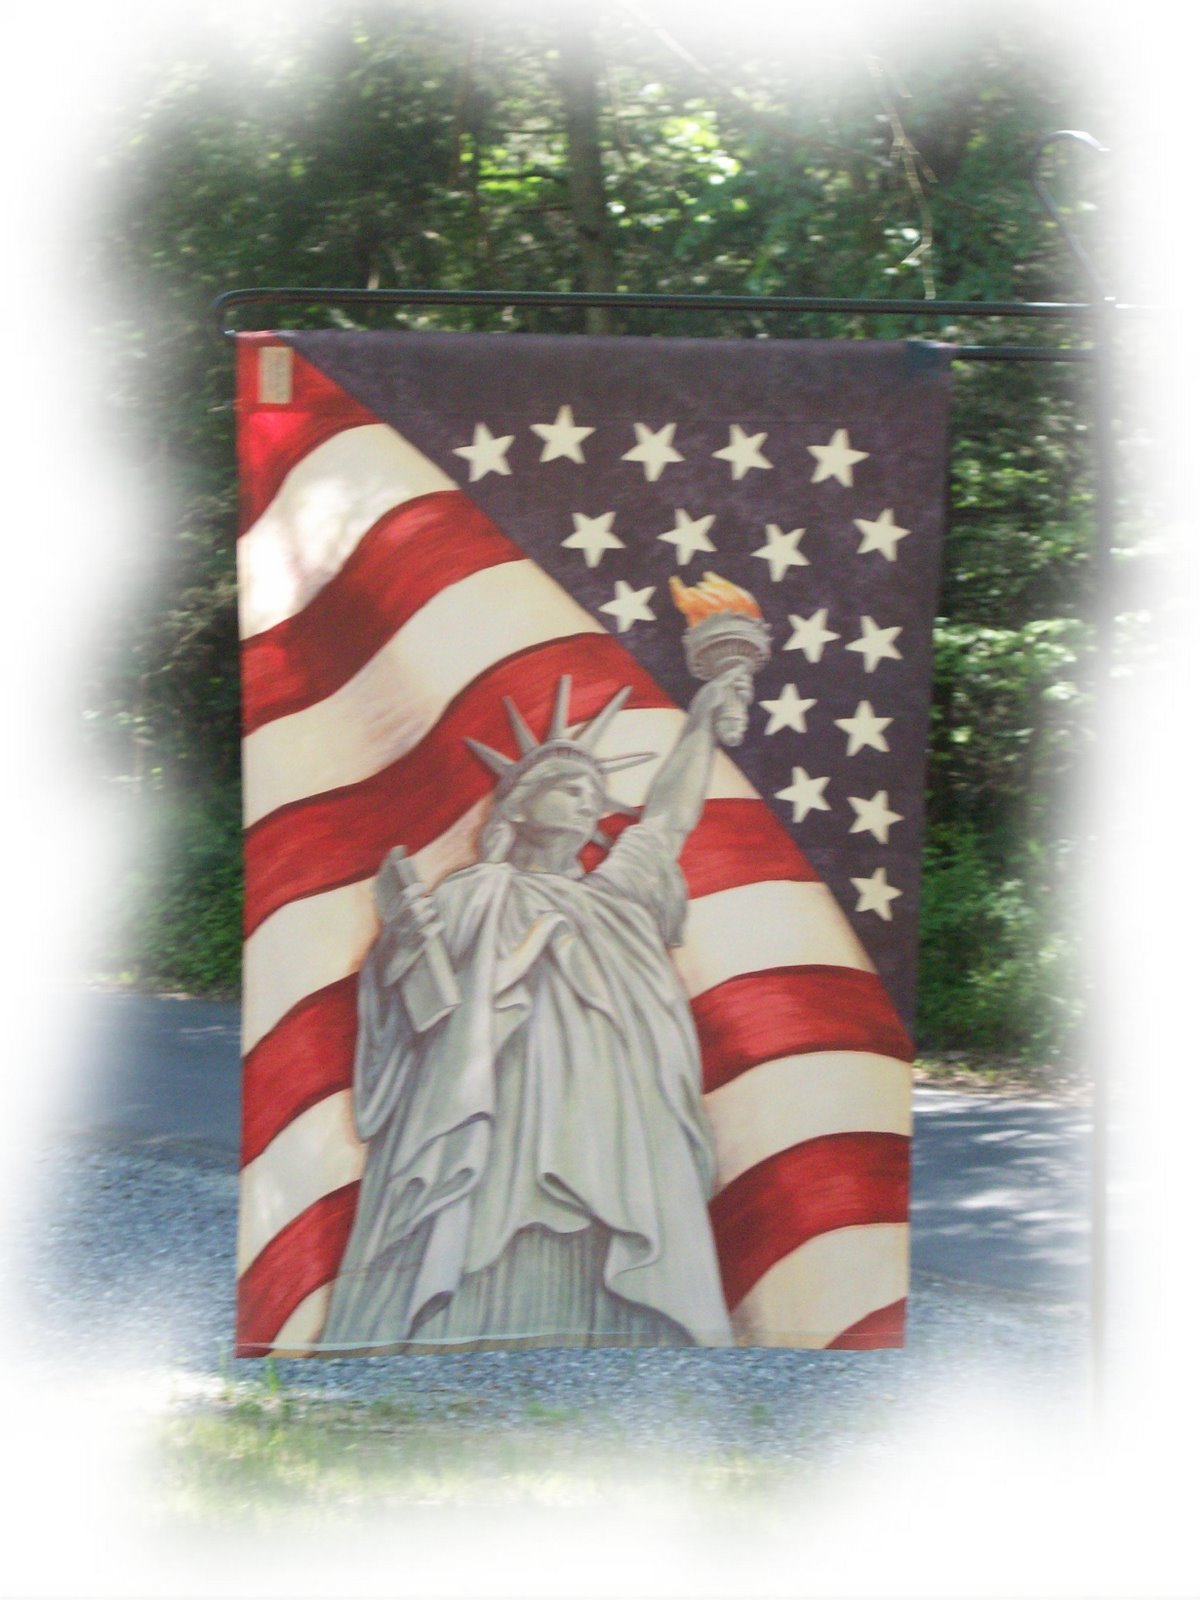 [Americana+flag,+large,+statue+of+liberty,cropped.jpg]